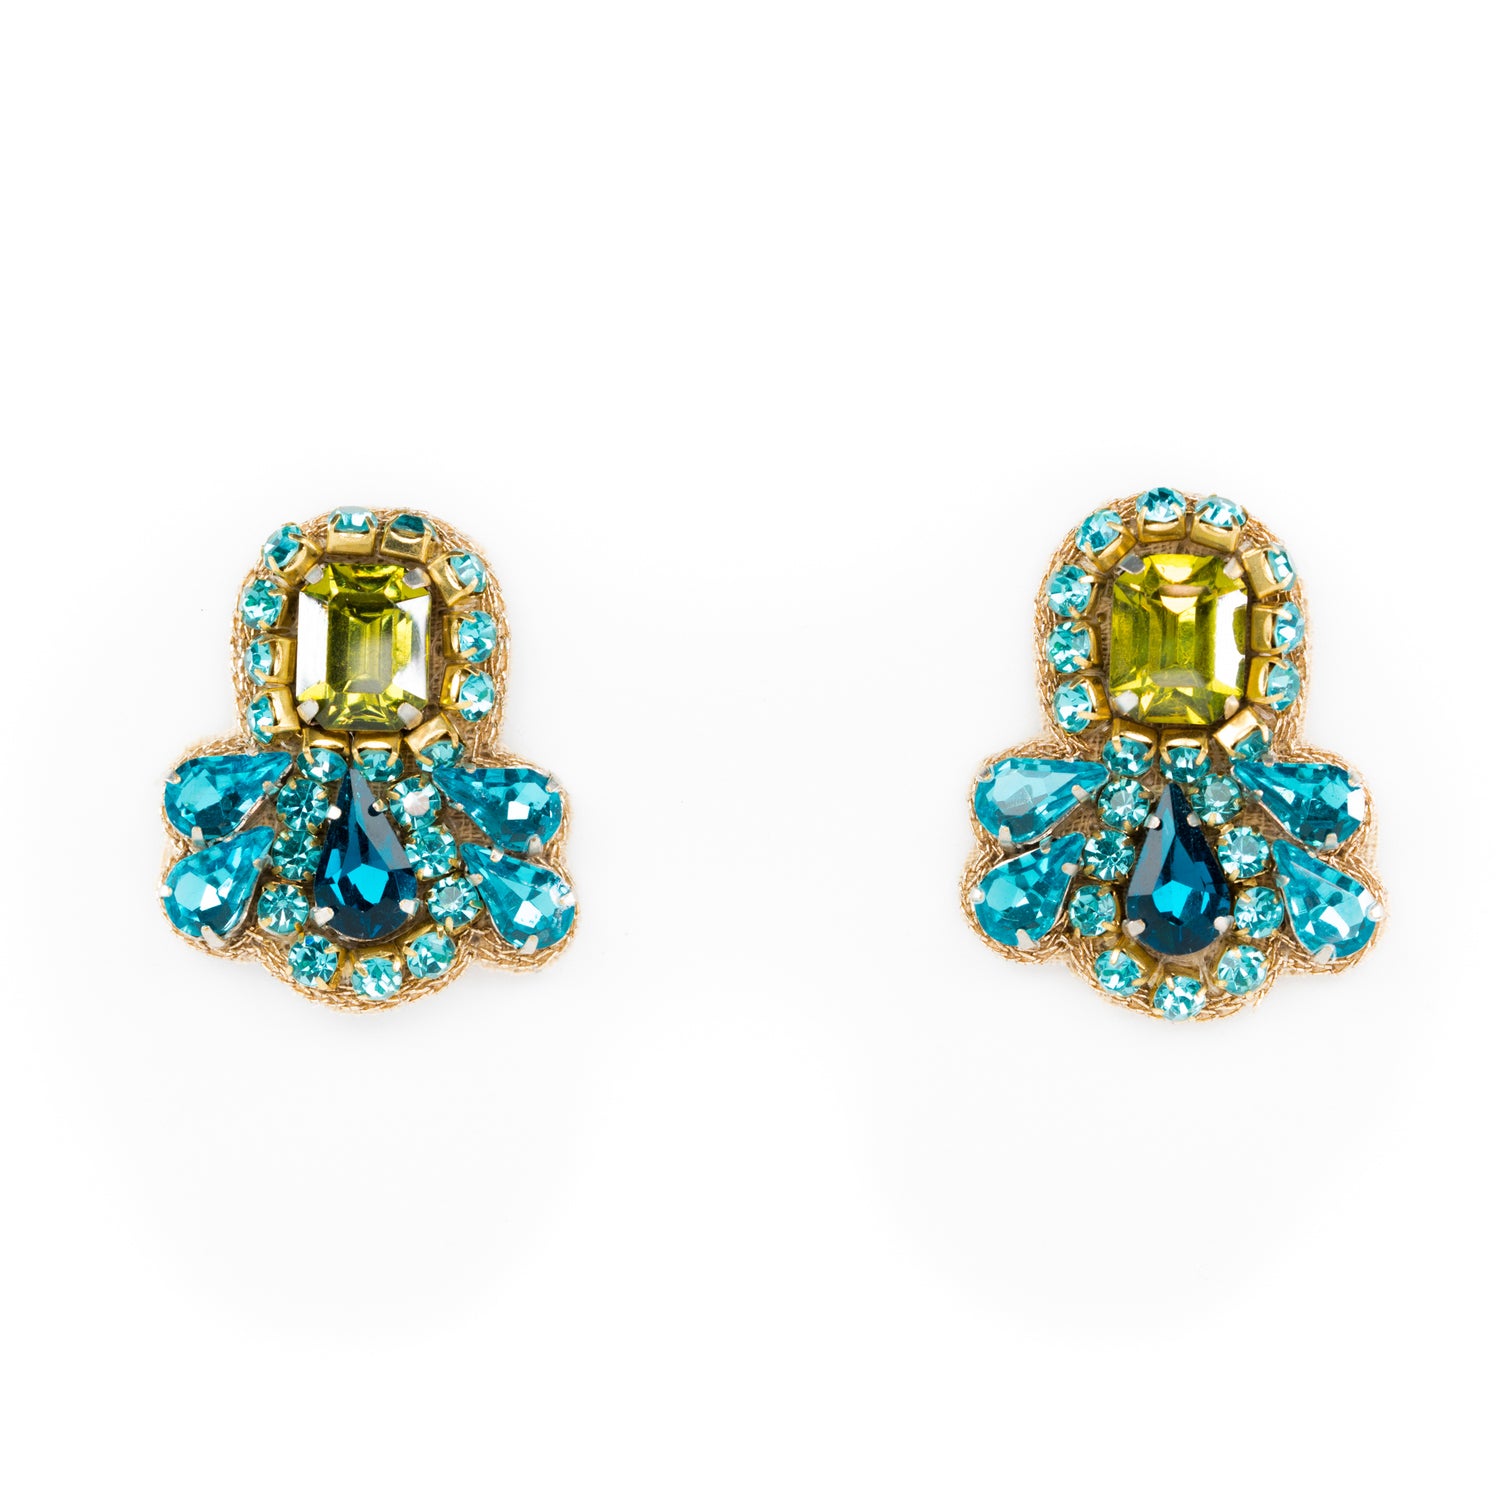 EARRINGS | Beth Ladd Collections